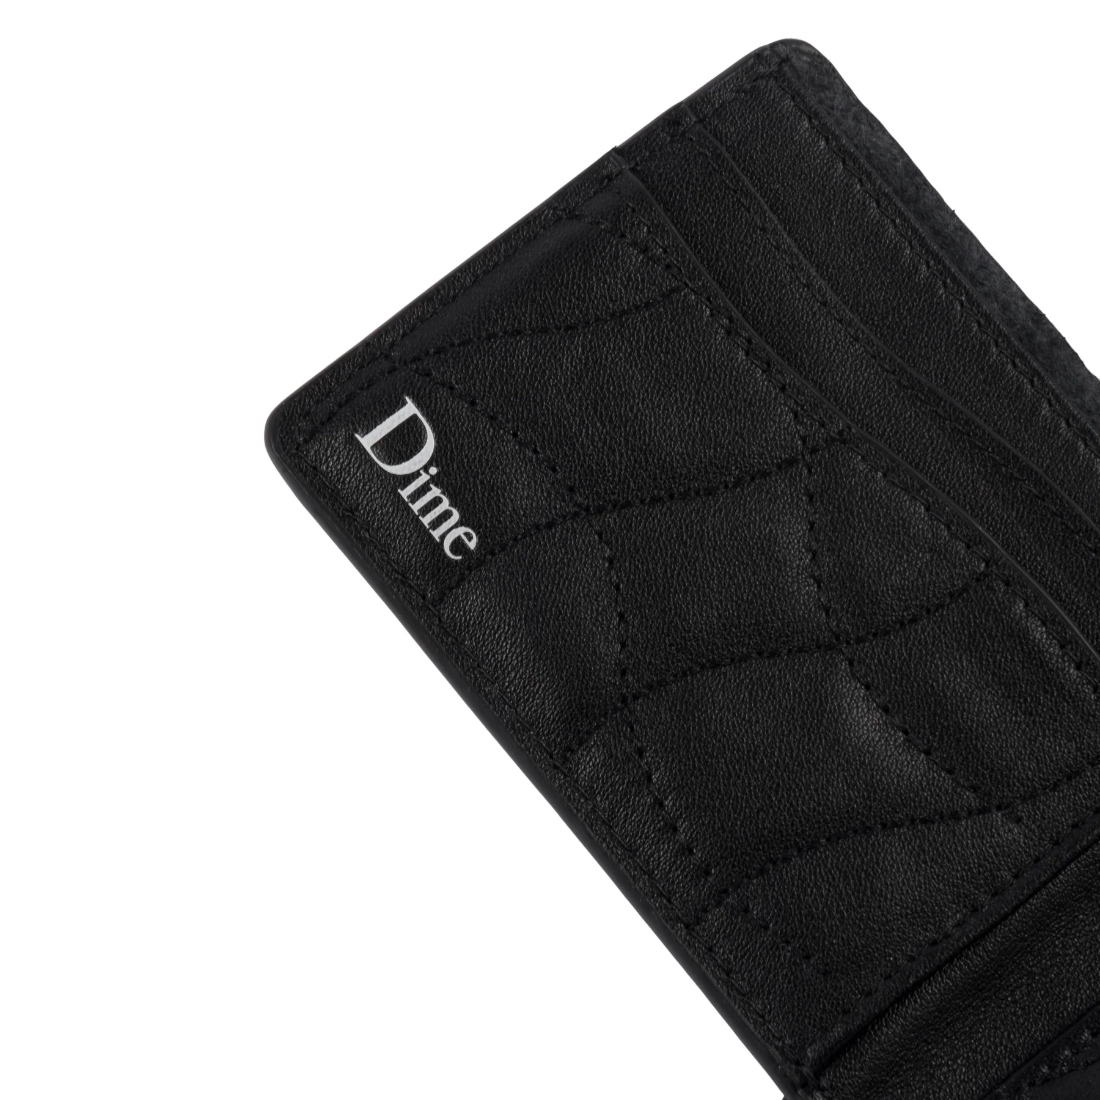 【Dime】Quilted Bifold wallet - Black